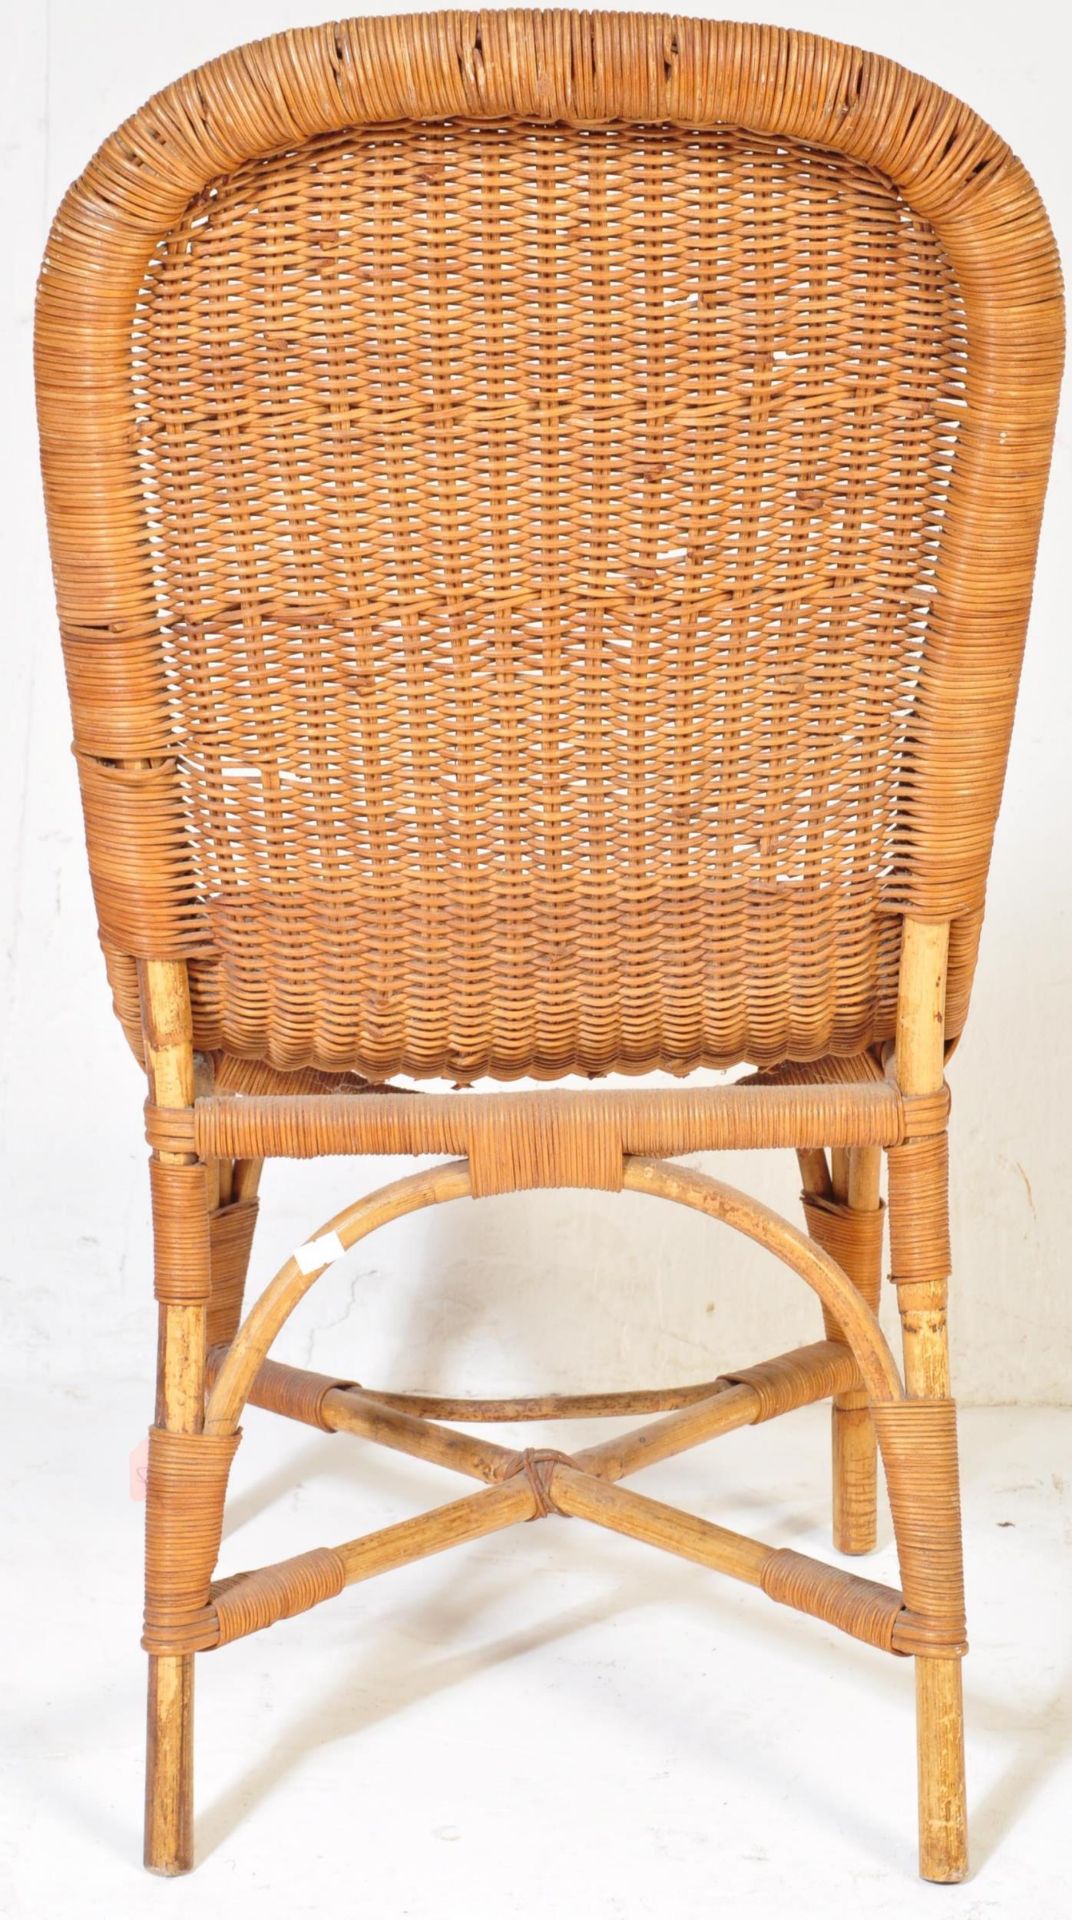 RETRO MID 20TH CENTURY WICKER CONSERVATORY CHAIR - Image 4 of 5